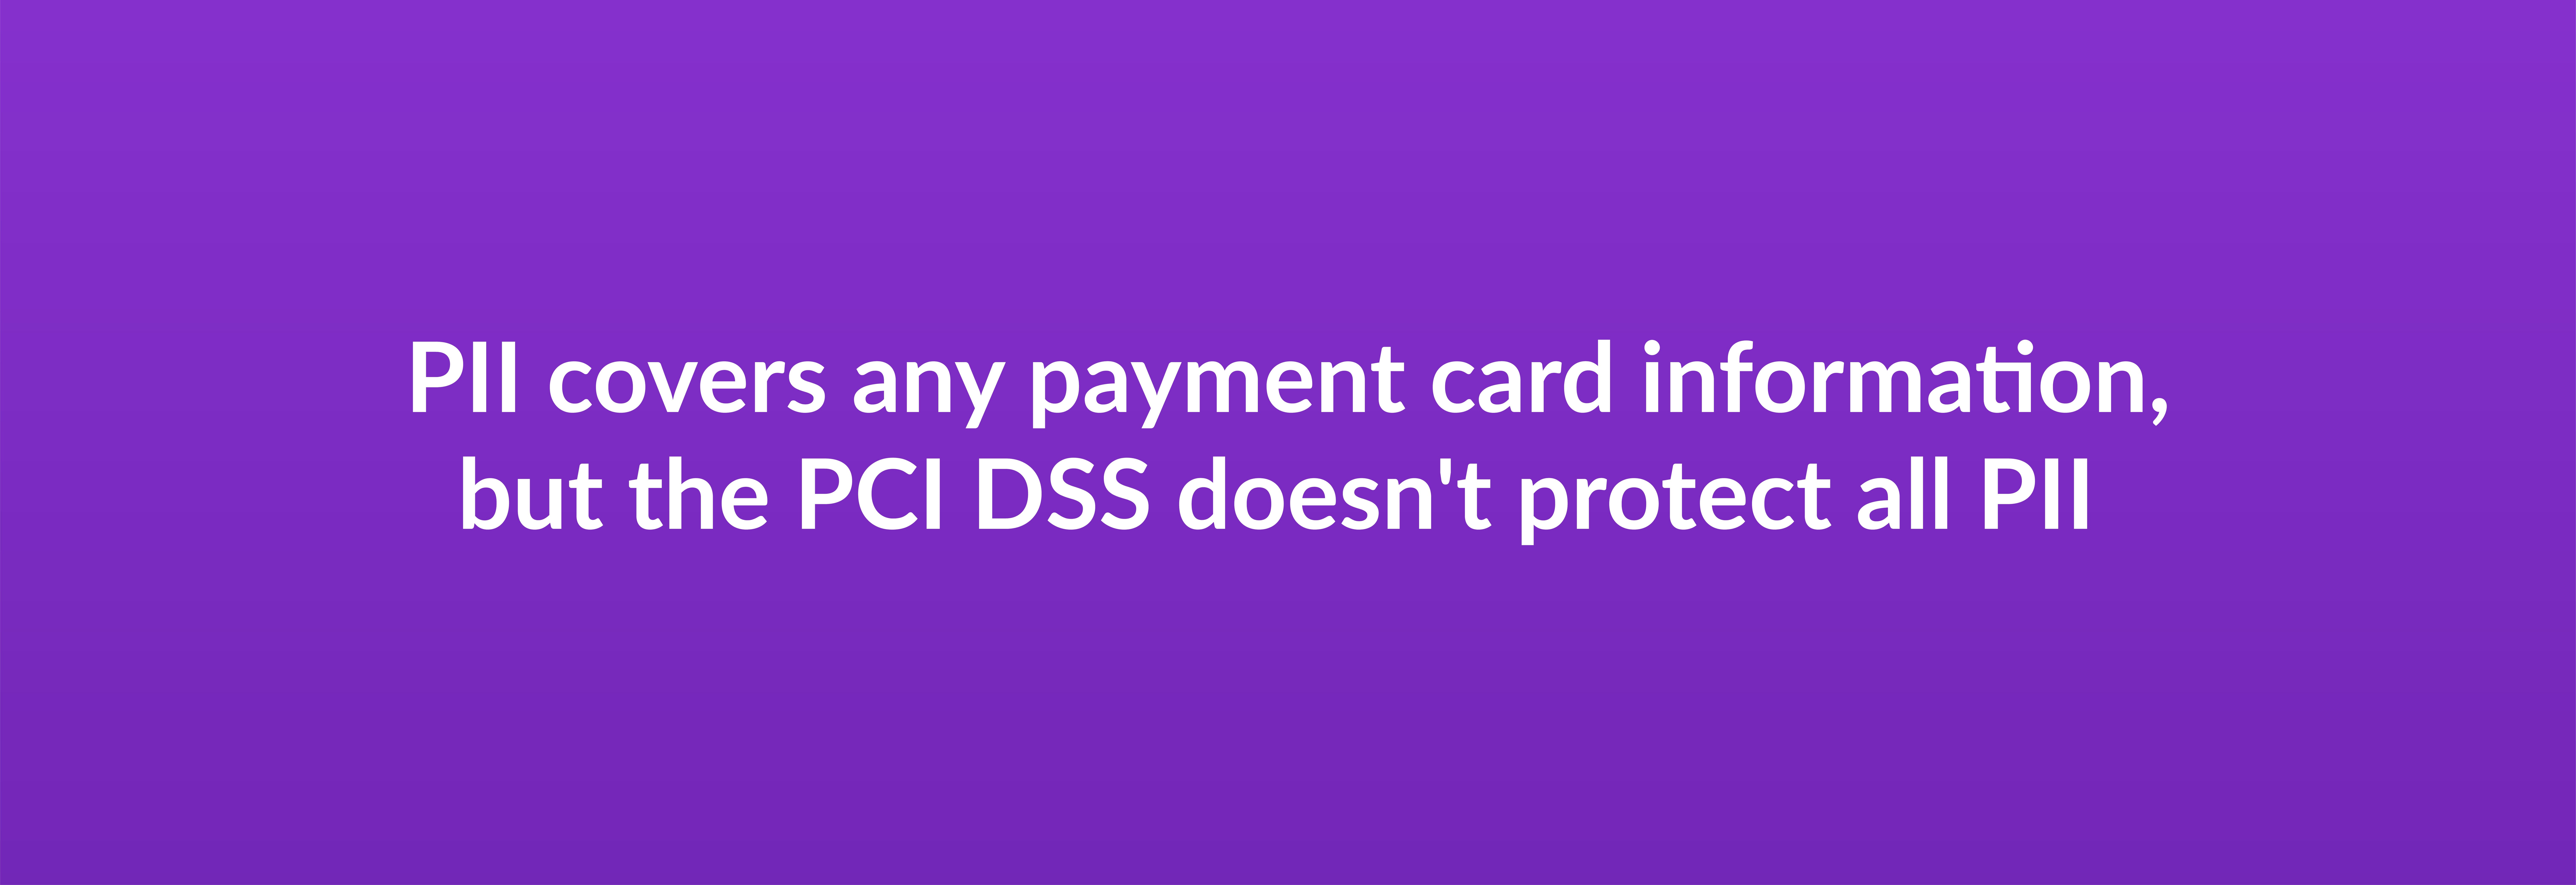 PII covers any payment card information, but the PCI DSS doesn't protect all PII